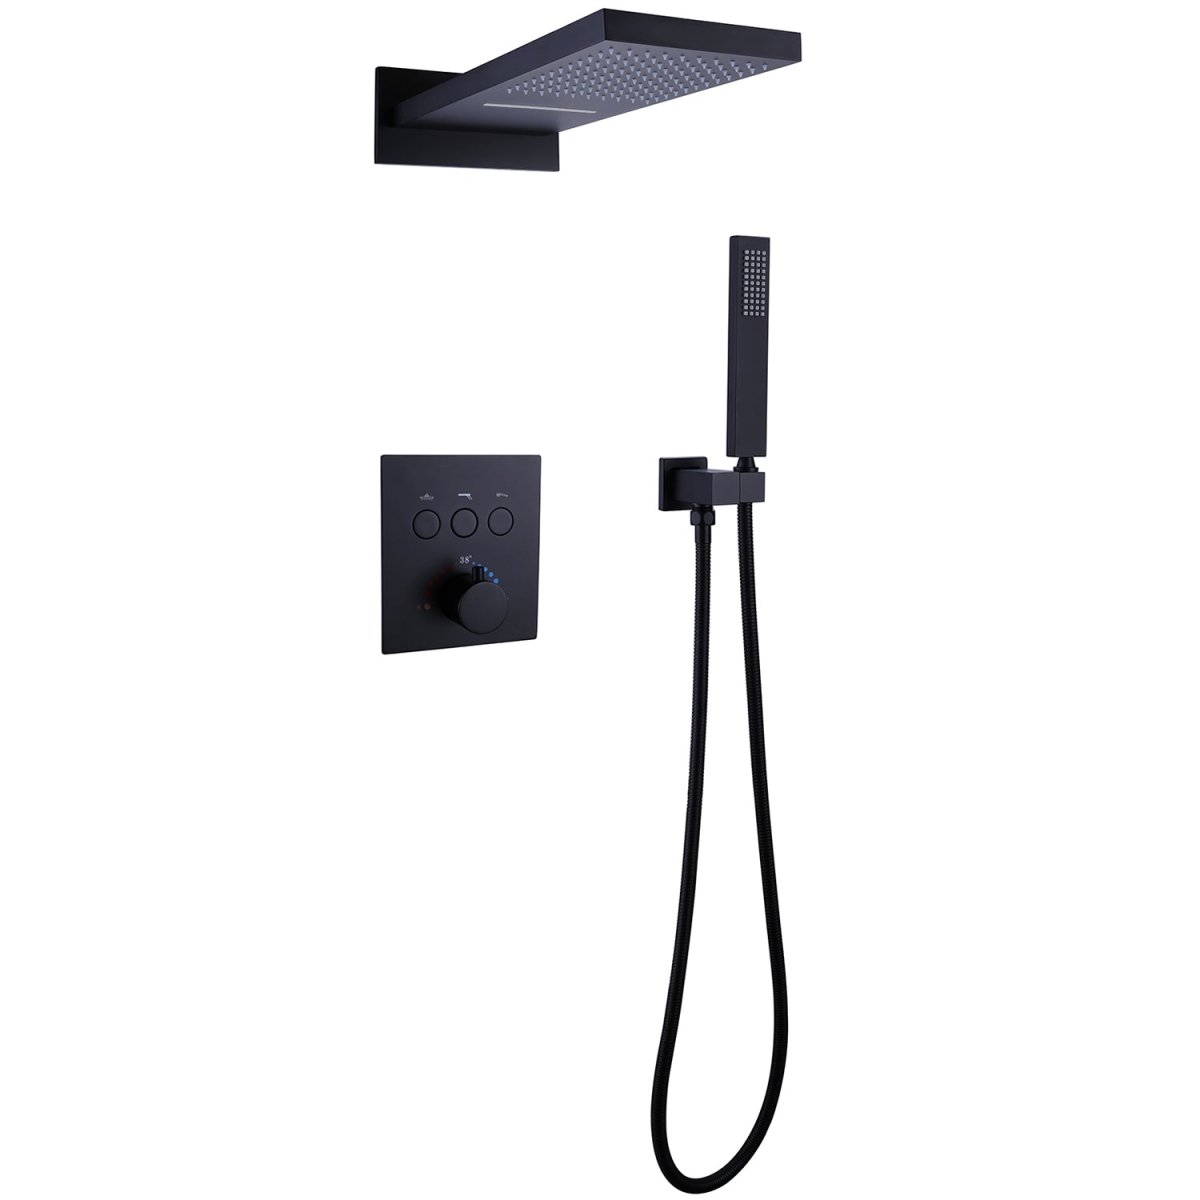 ExBrite Shower System Square Waterfall Rain Shower Set, Three-function Thermostatic Concealed Bathroom Shower Fixture, Matte Black Copper Materia - ExBriteUSA